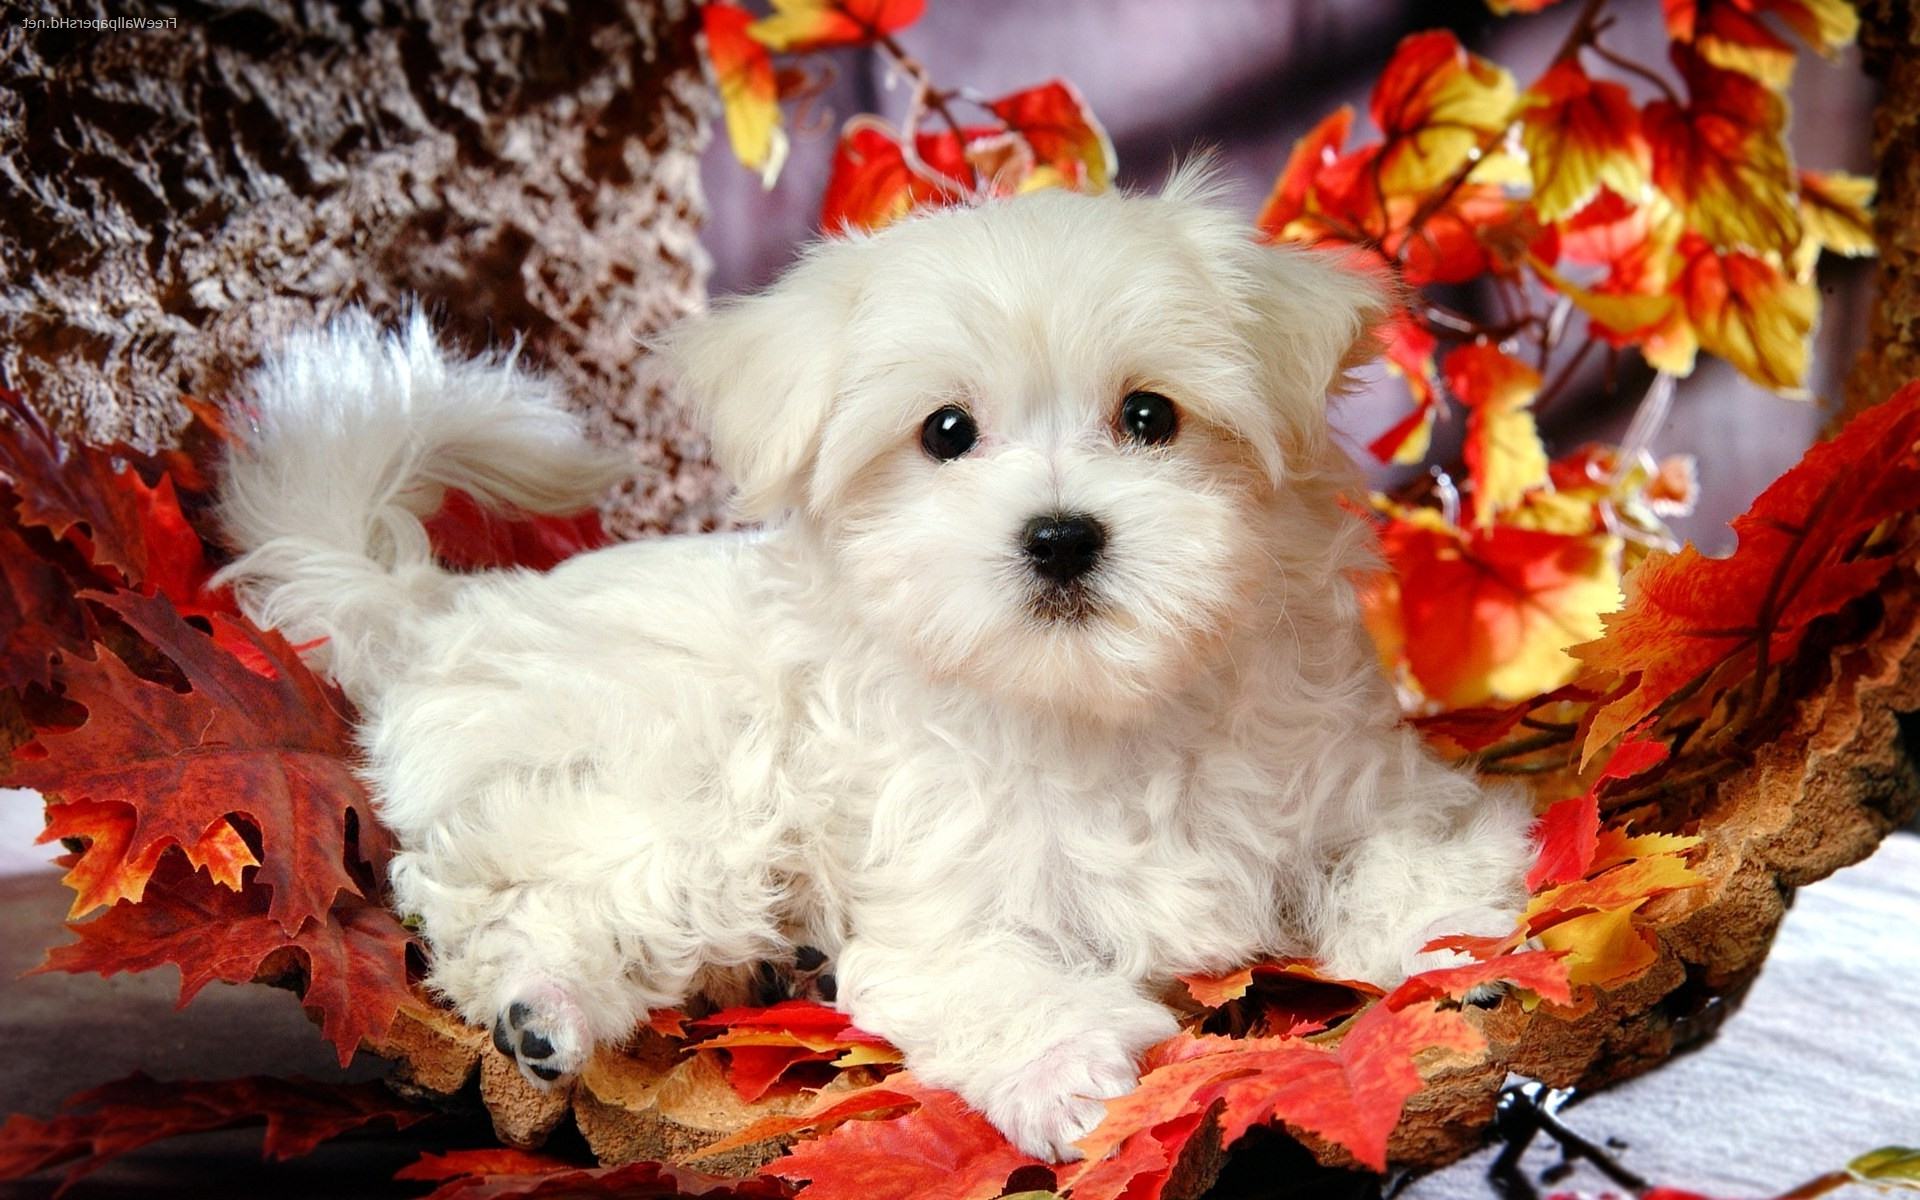 Cute Puppy HD Wallpaper Image Pictures